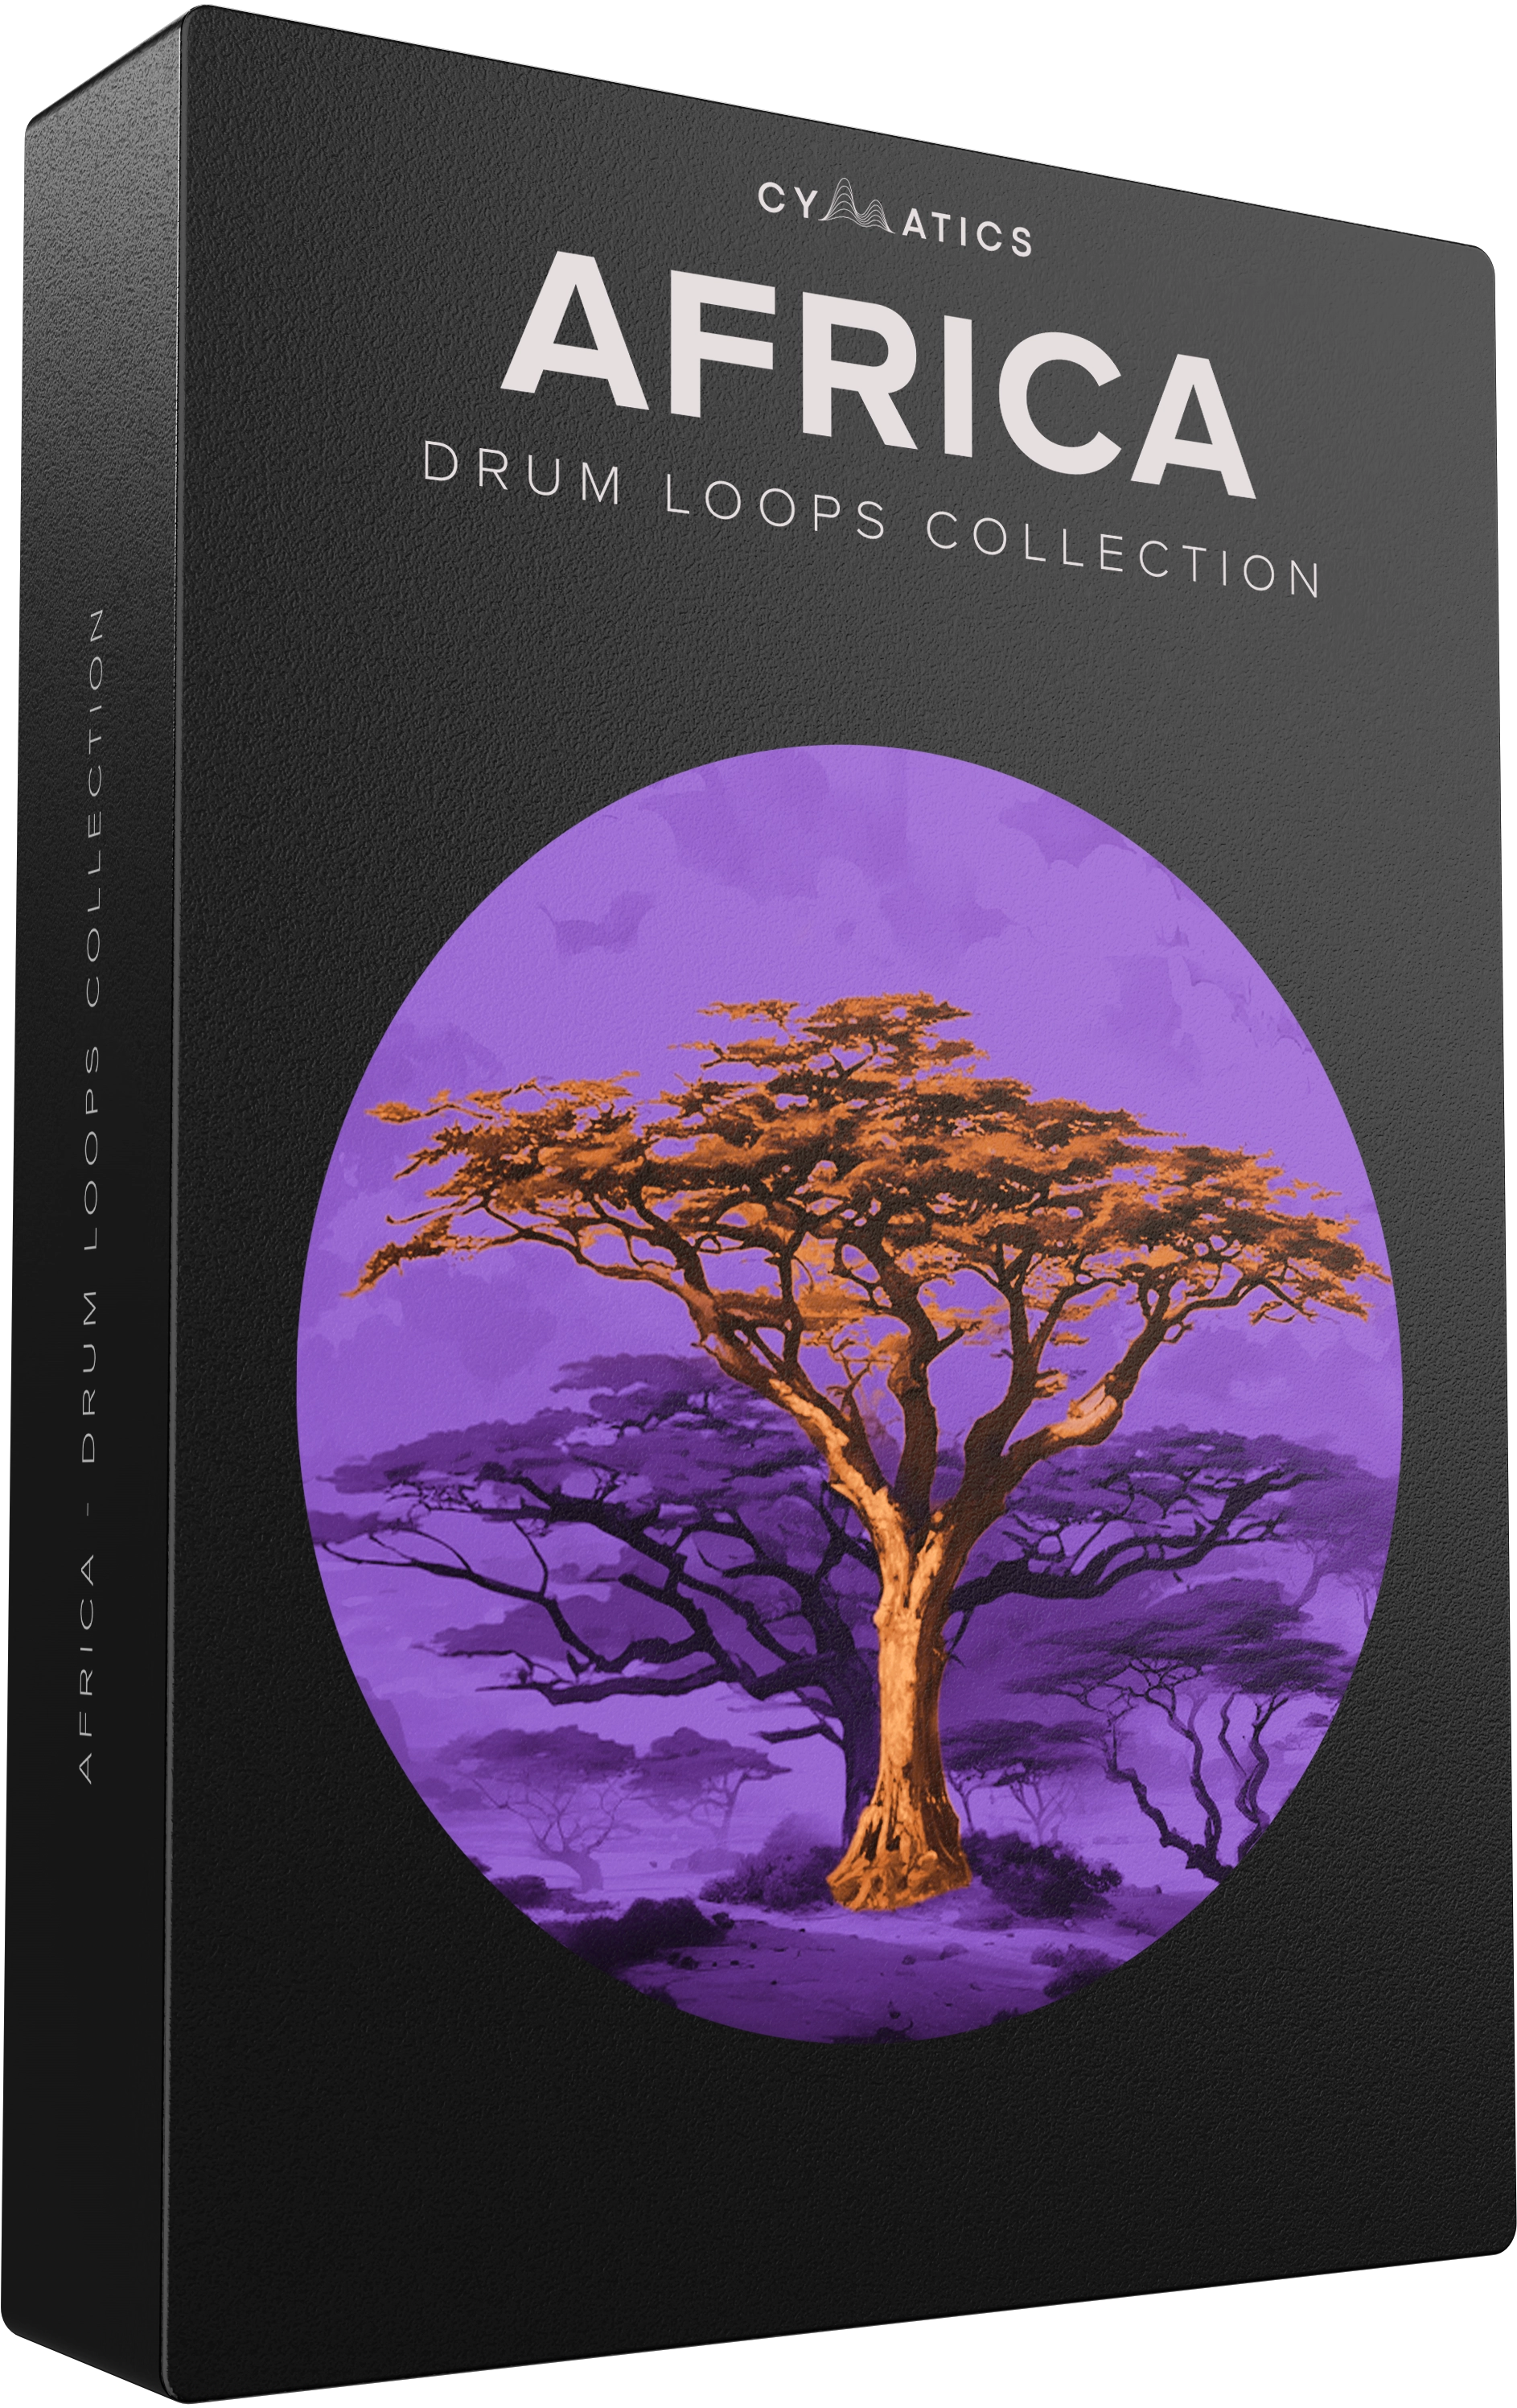 Africa: Drum Loops Collection